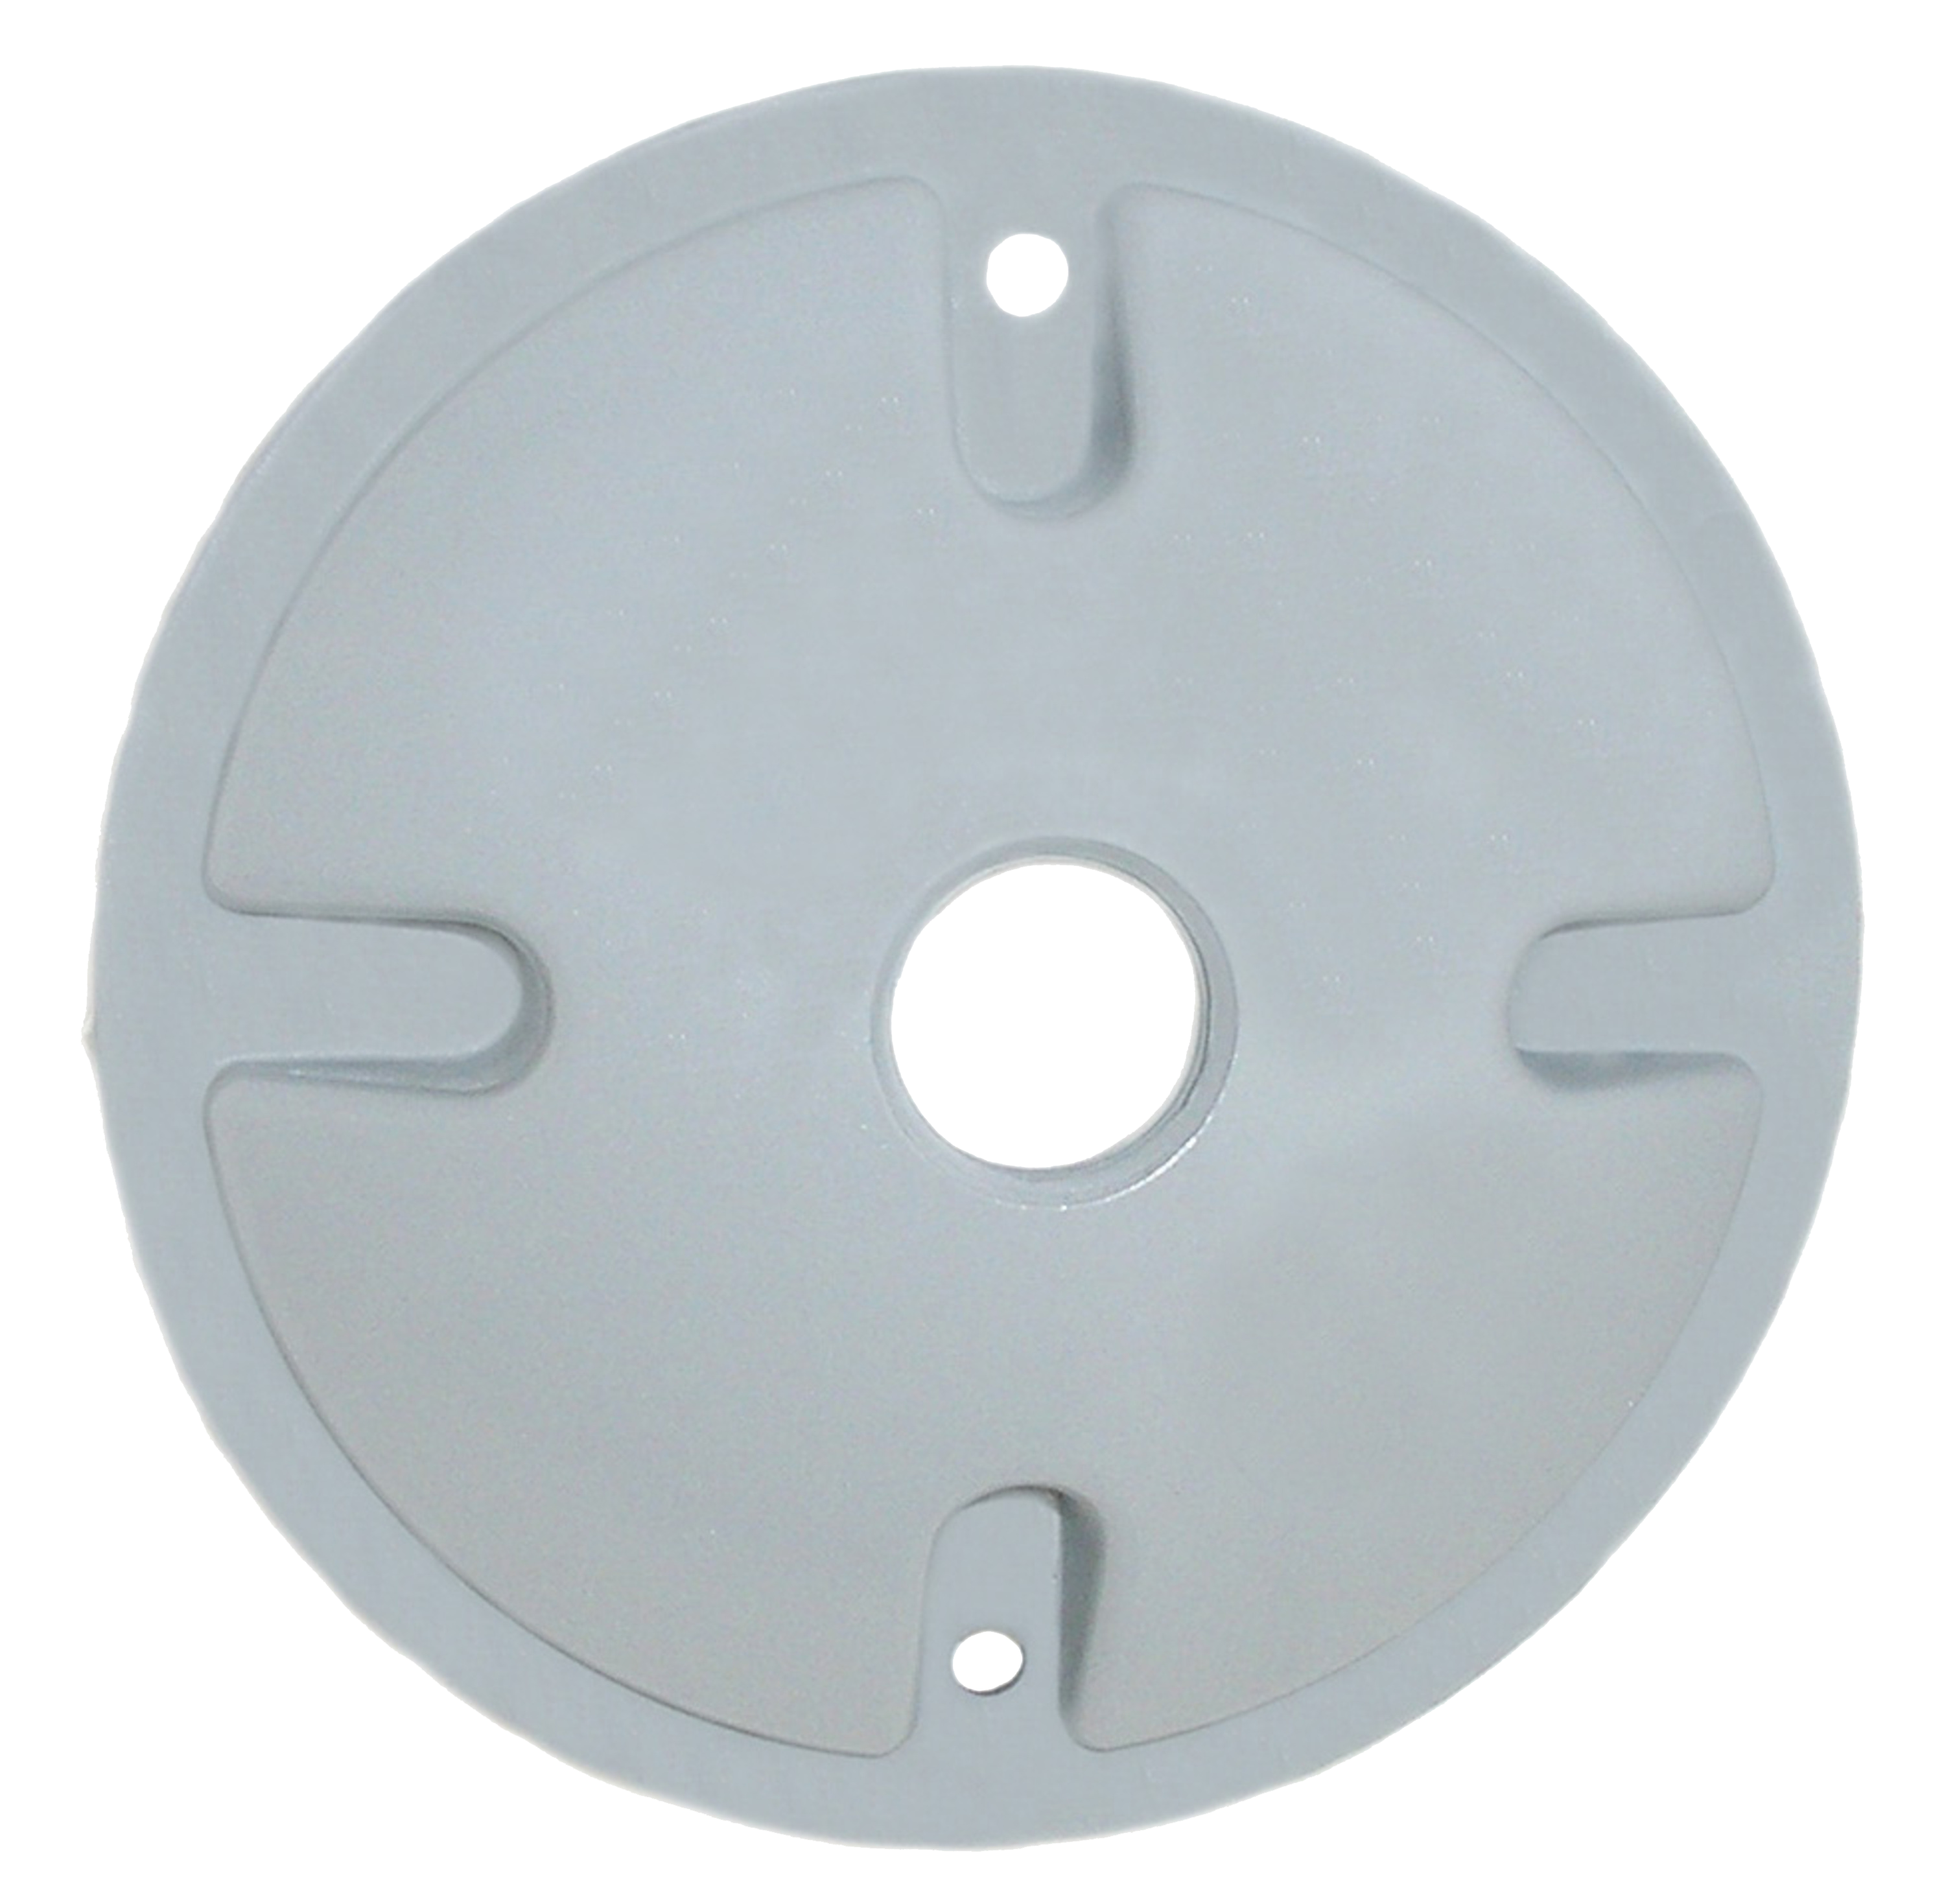 ROUND COVER - 4" ONE HOLE